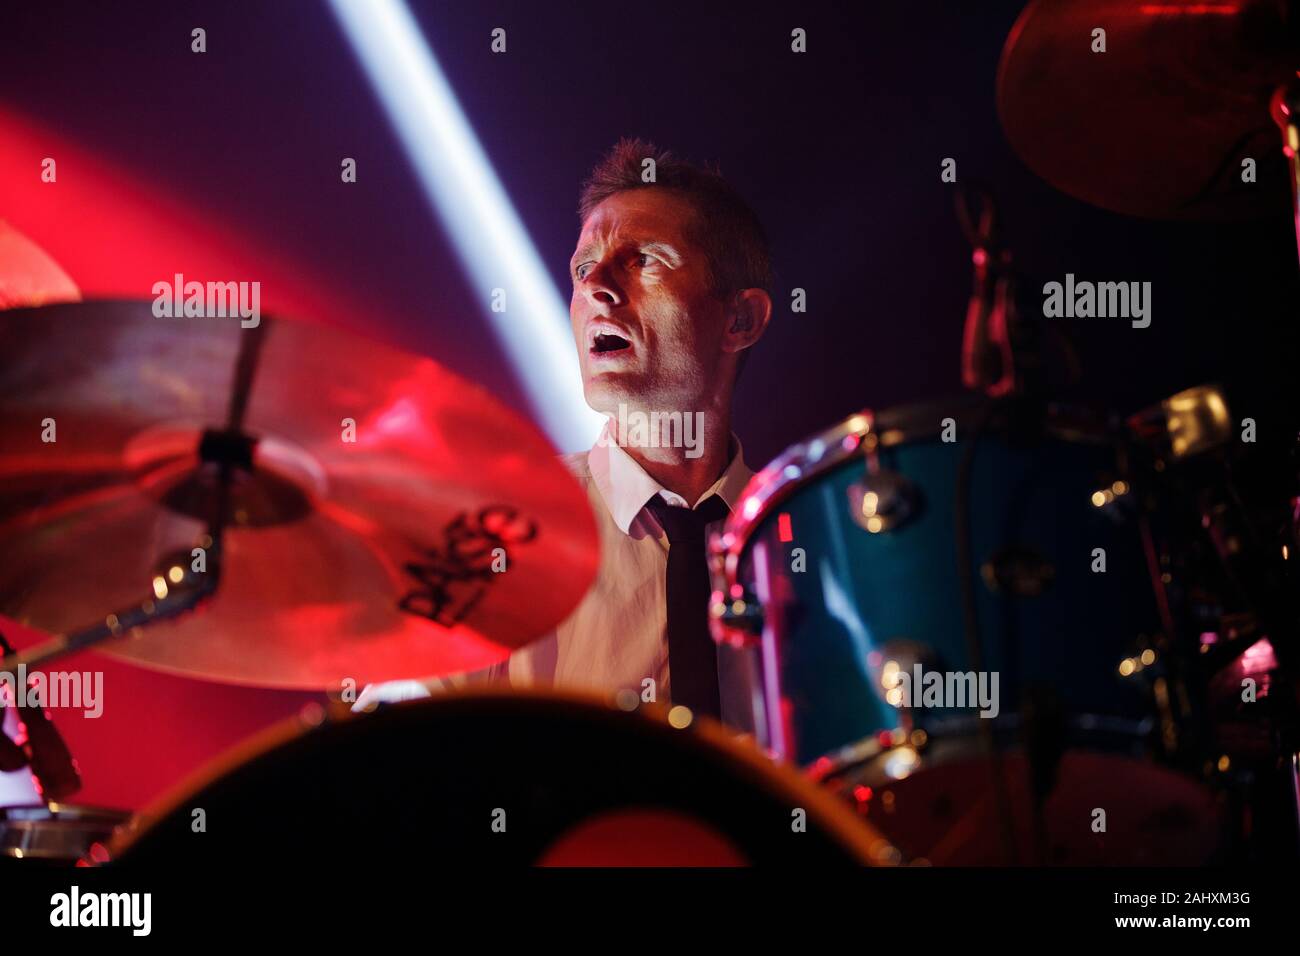 Vig, Denmark. 11th, July 2019. The Danish band Michael Learns to Rock performs a live concert during the Danish music festival Vig Festival 2019. Here drummer Kåre Wanscher is seen live on stage. (Photo credit: Gonzales Photo - Martin Faelt). Stock Photo